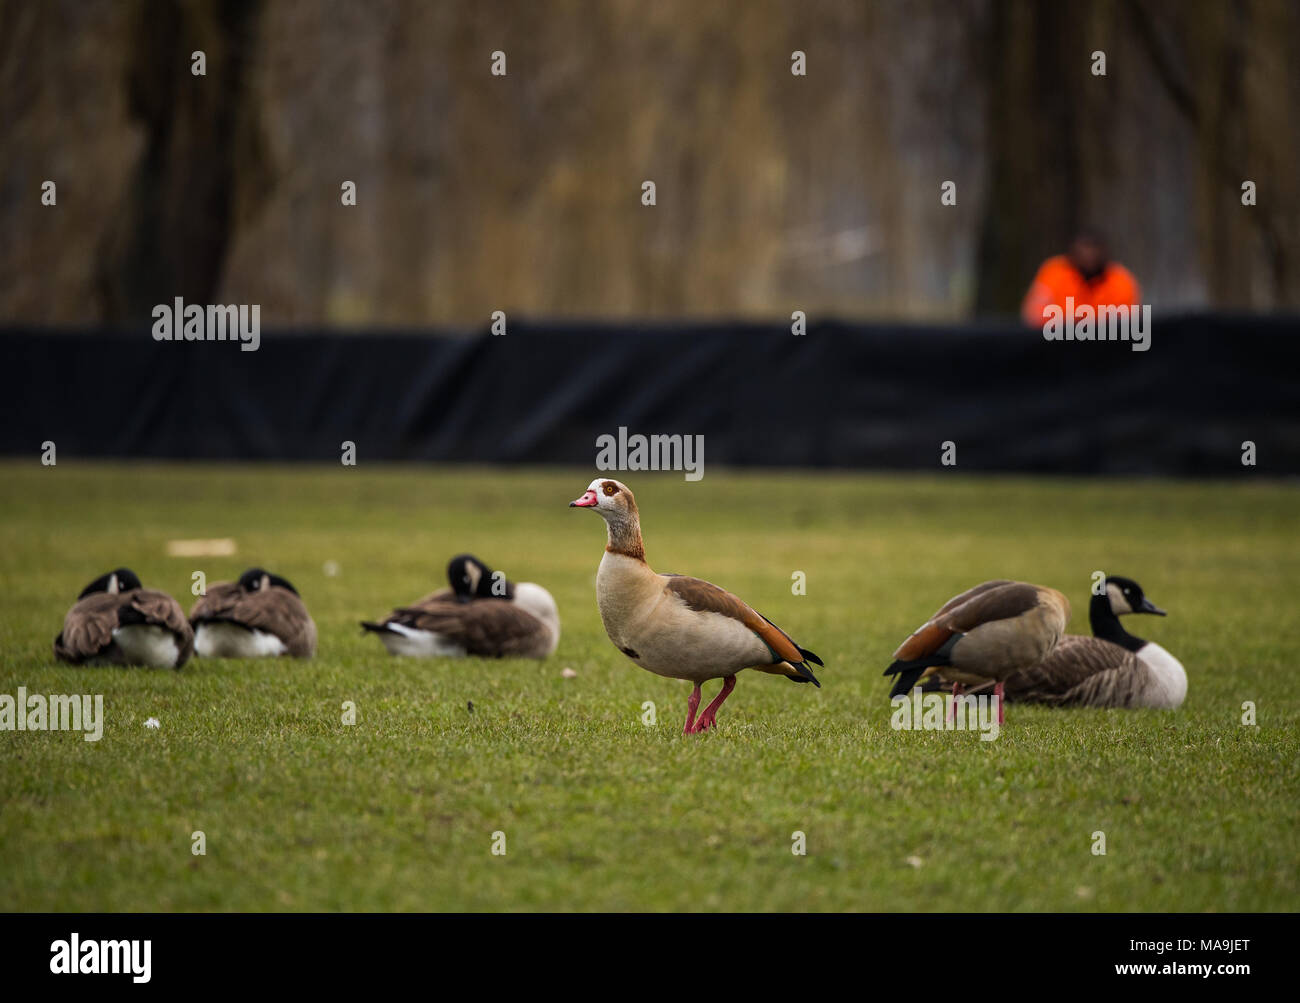 26 March 2018, Germany, Frankfurt am Main: Several geese resting and  standing on the lawn in the Ostpark. The city of Frankfurt has declared war  on the birds with the "Nile Geese